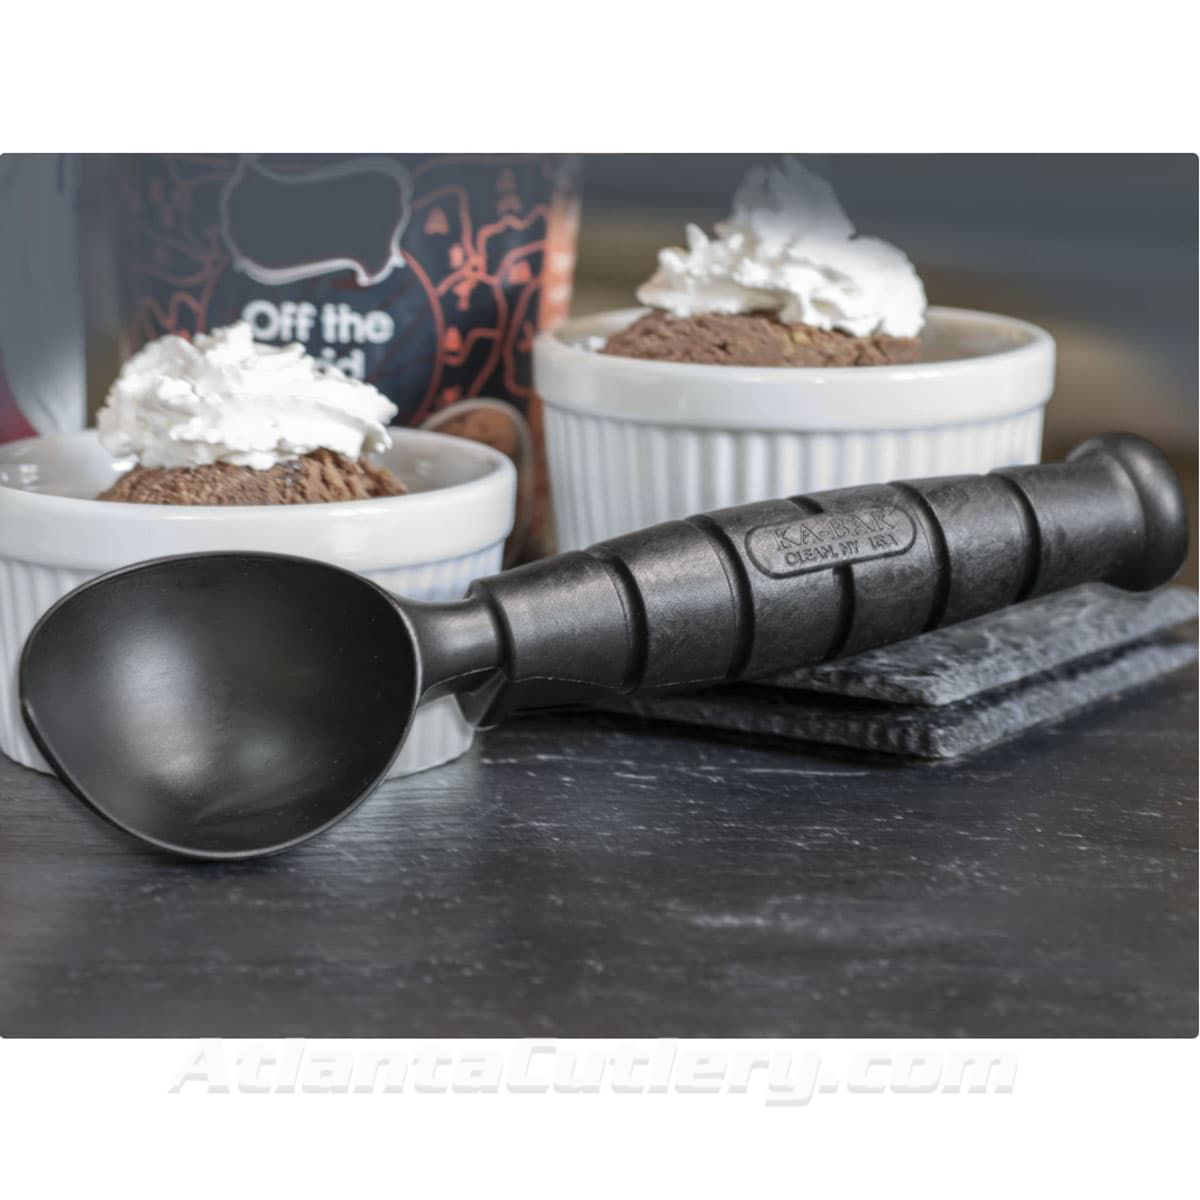 KA-BAR Dessert Destroyer Ice Cream Scoop also works with watermelon and cantaloupe, made in USA with Creamid, dishwasher safe 